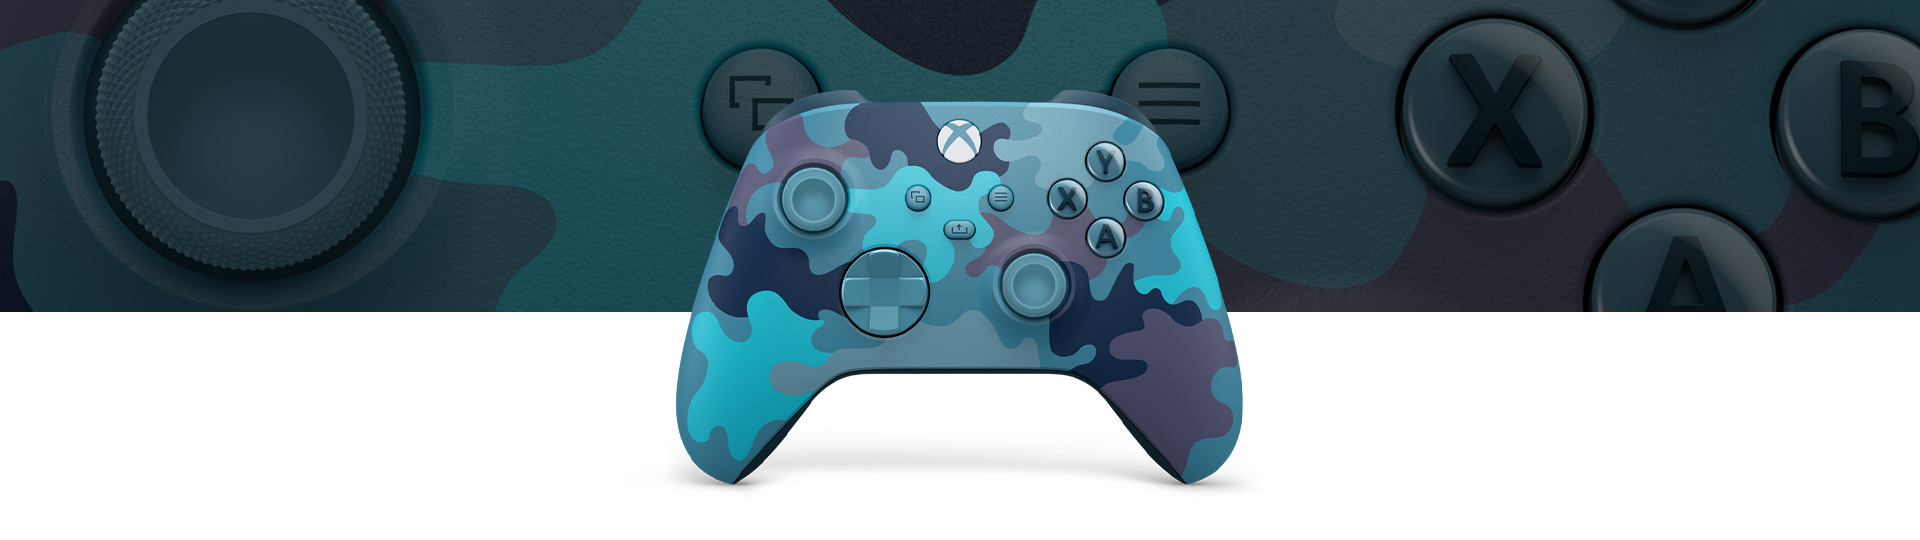  Xbox Wireless Controller Mineral Camo in front of a close-up of the controller